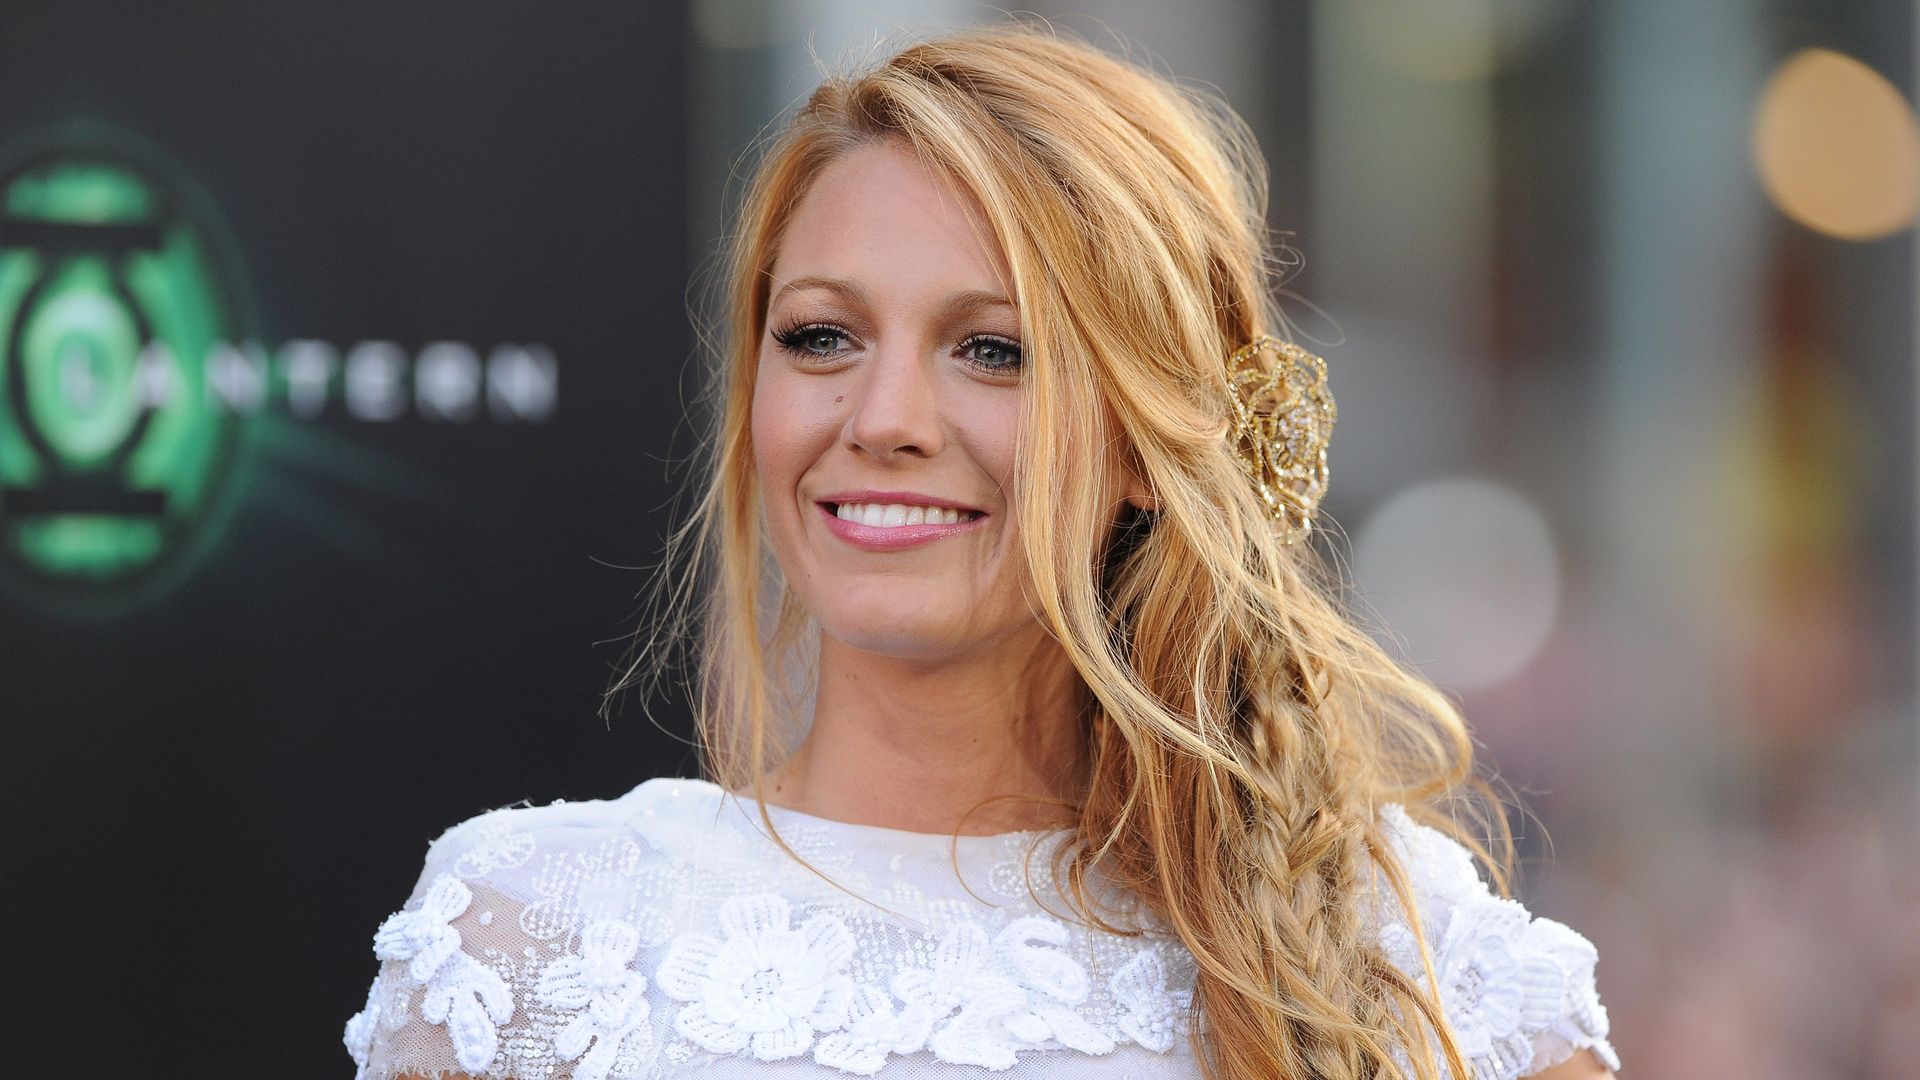 Blake Lively was a goddess in ethereal sheer-skirted wedding dress